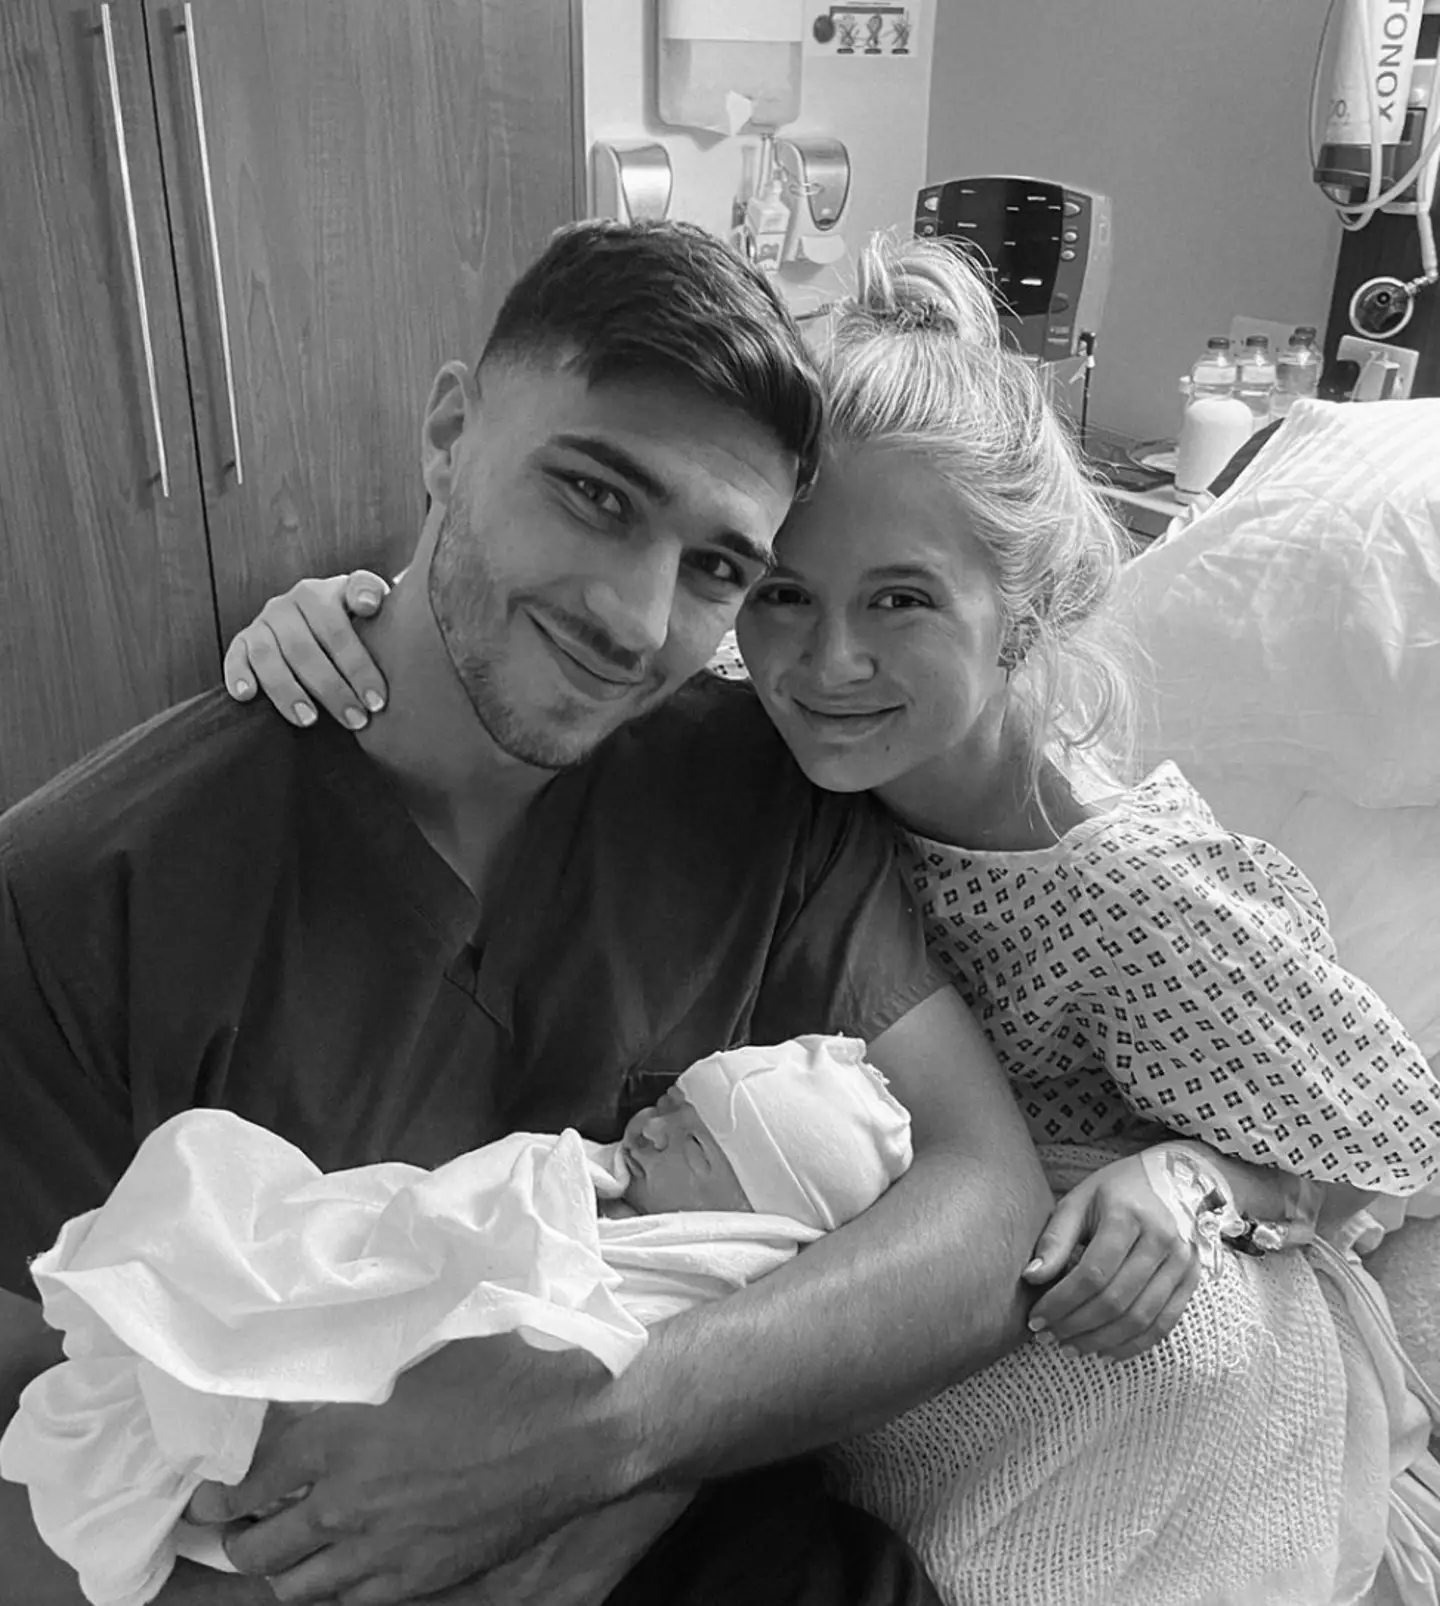 Molly-Mae Hague and Tommy Fury with their newborn daughter in hospital.